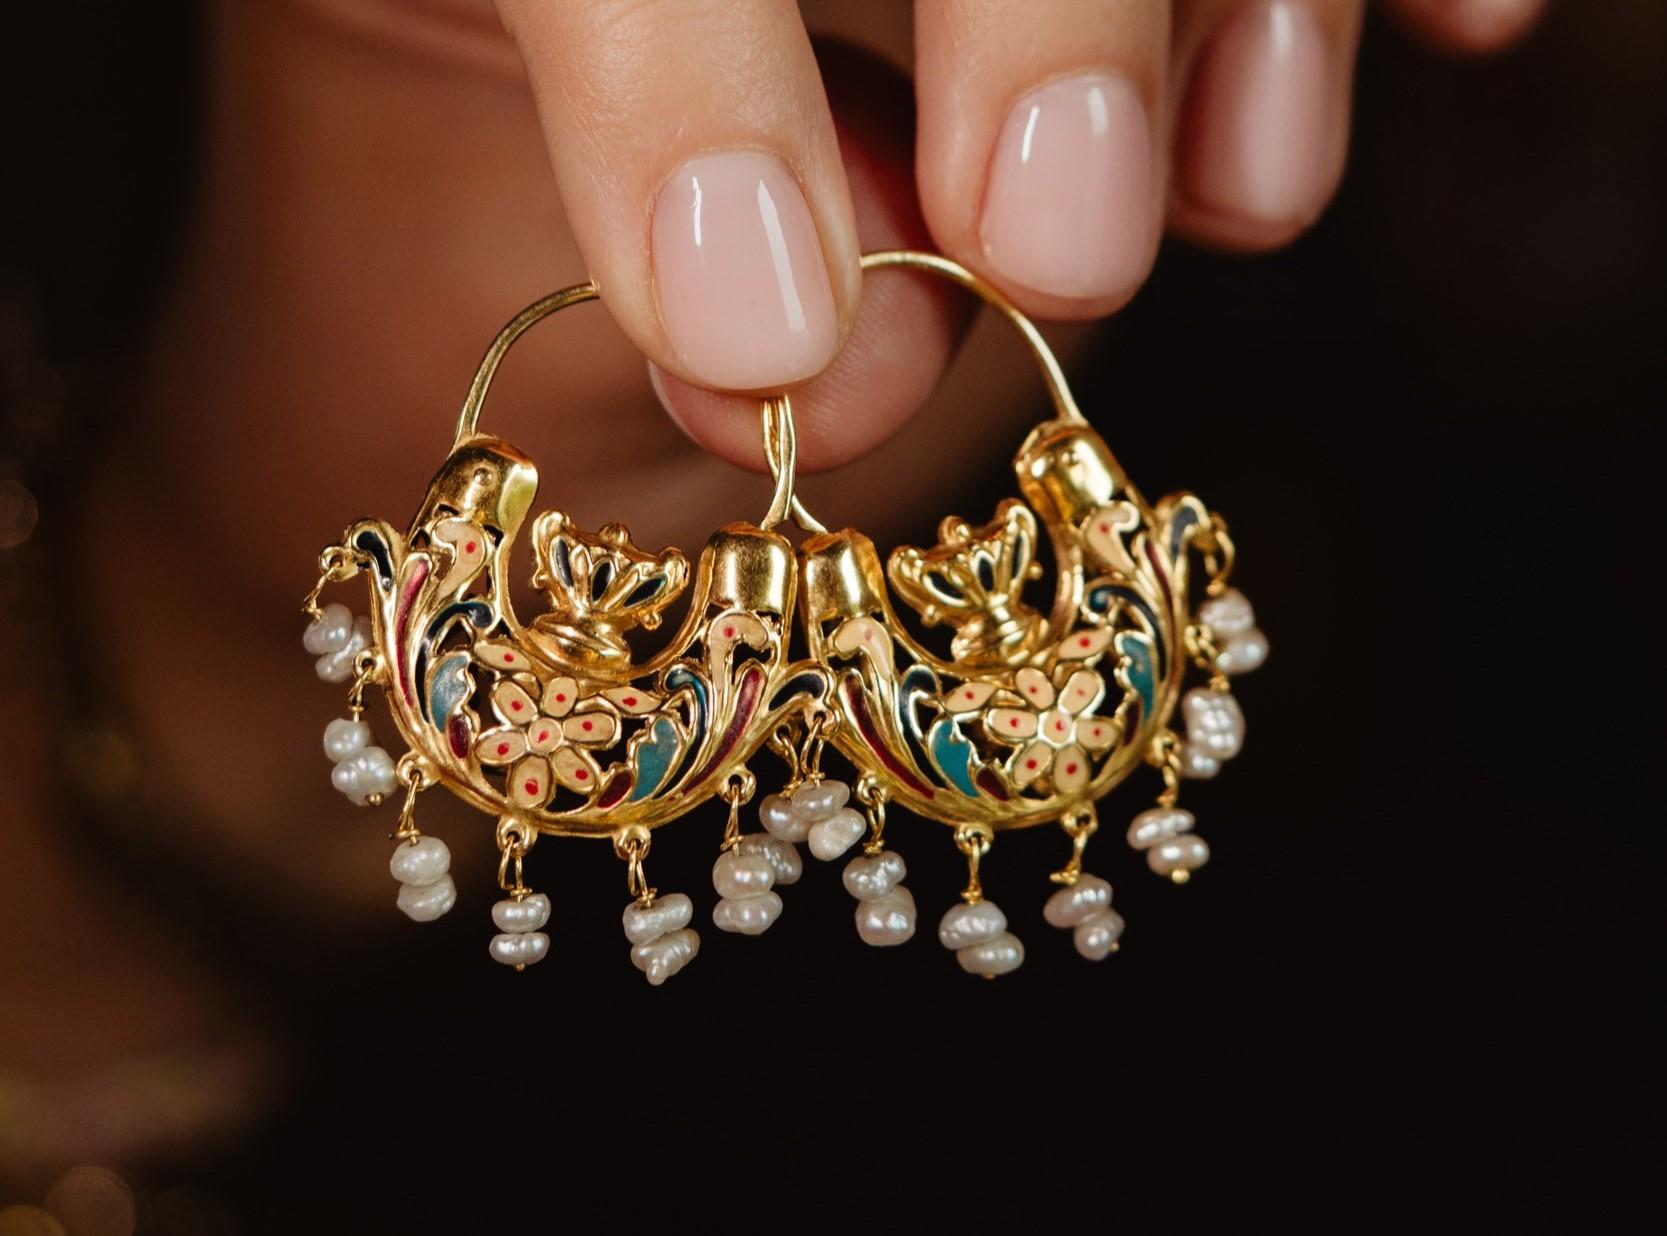 A museum-worthy 19th century pair of solid 18k gold earrings! Coming from the South of Italy, these archeological revival style earrings are adorned with the colorful enamel.

An extremely fine pair will turn the heads! Accented with baroque pearls